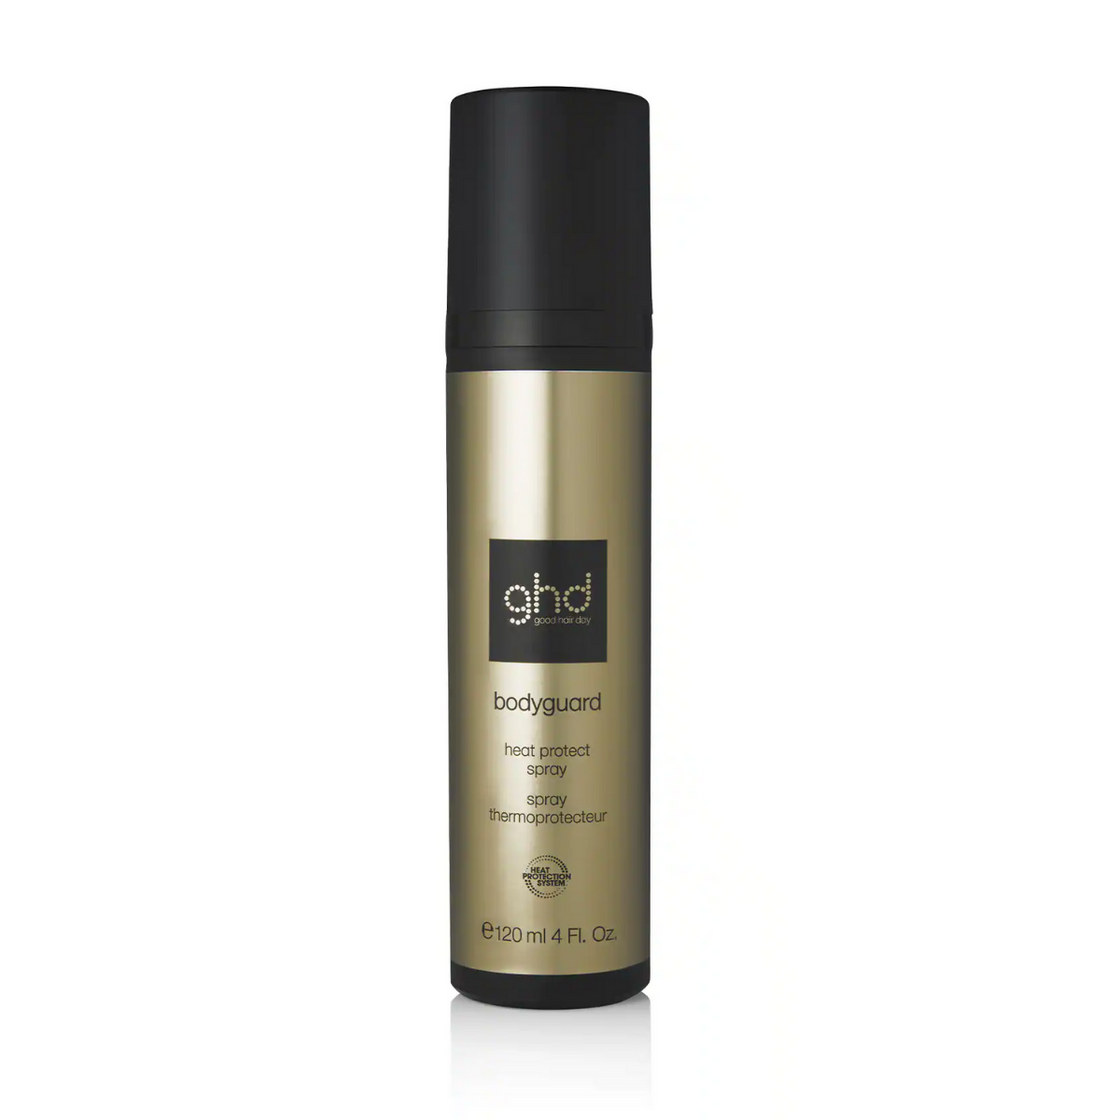 ghd heat protect bodyguard spray termoprotettore – HC STORE FORNITURE